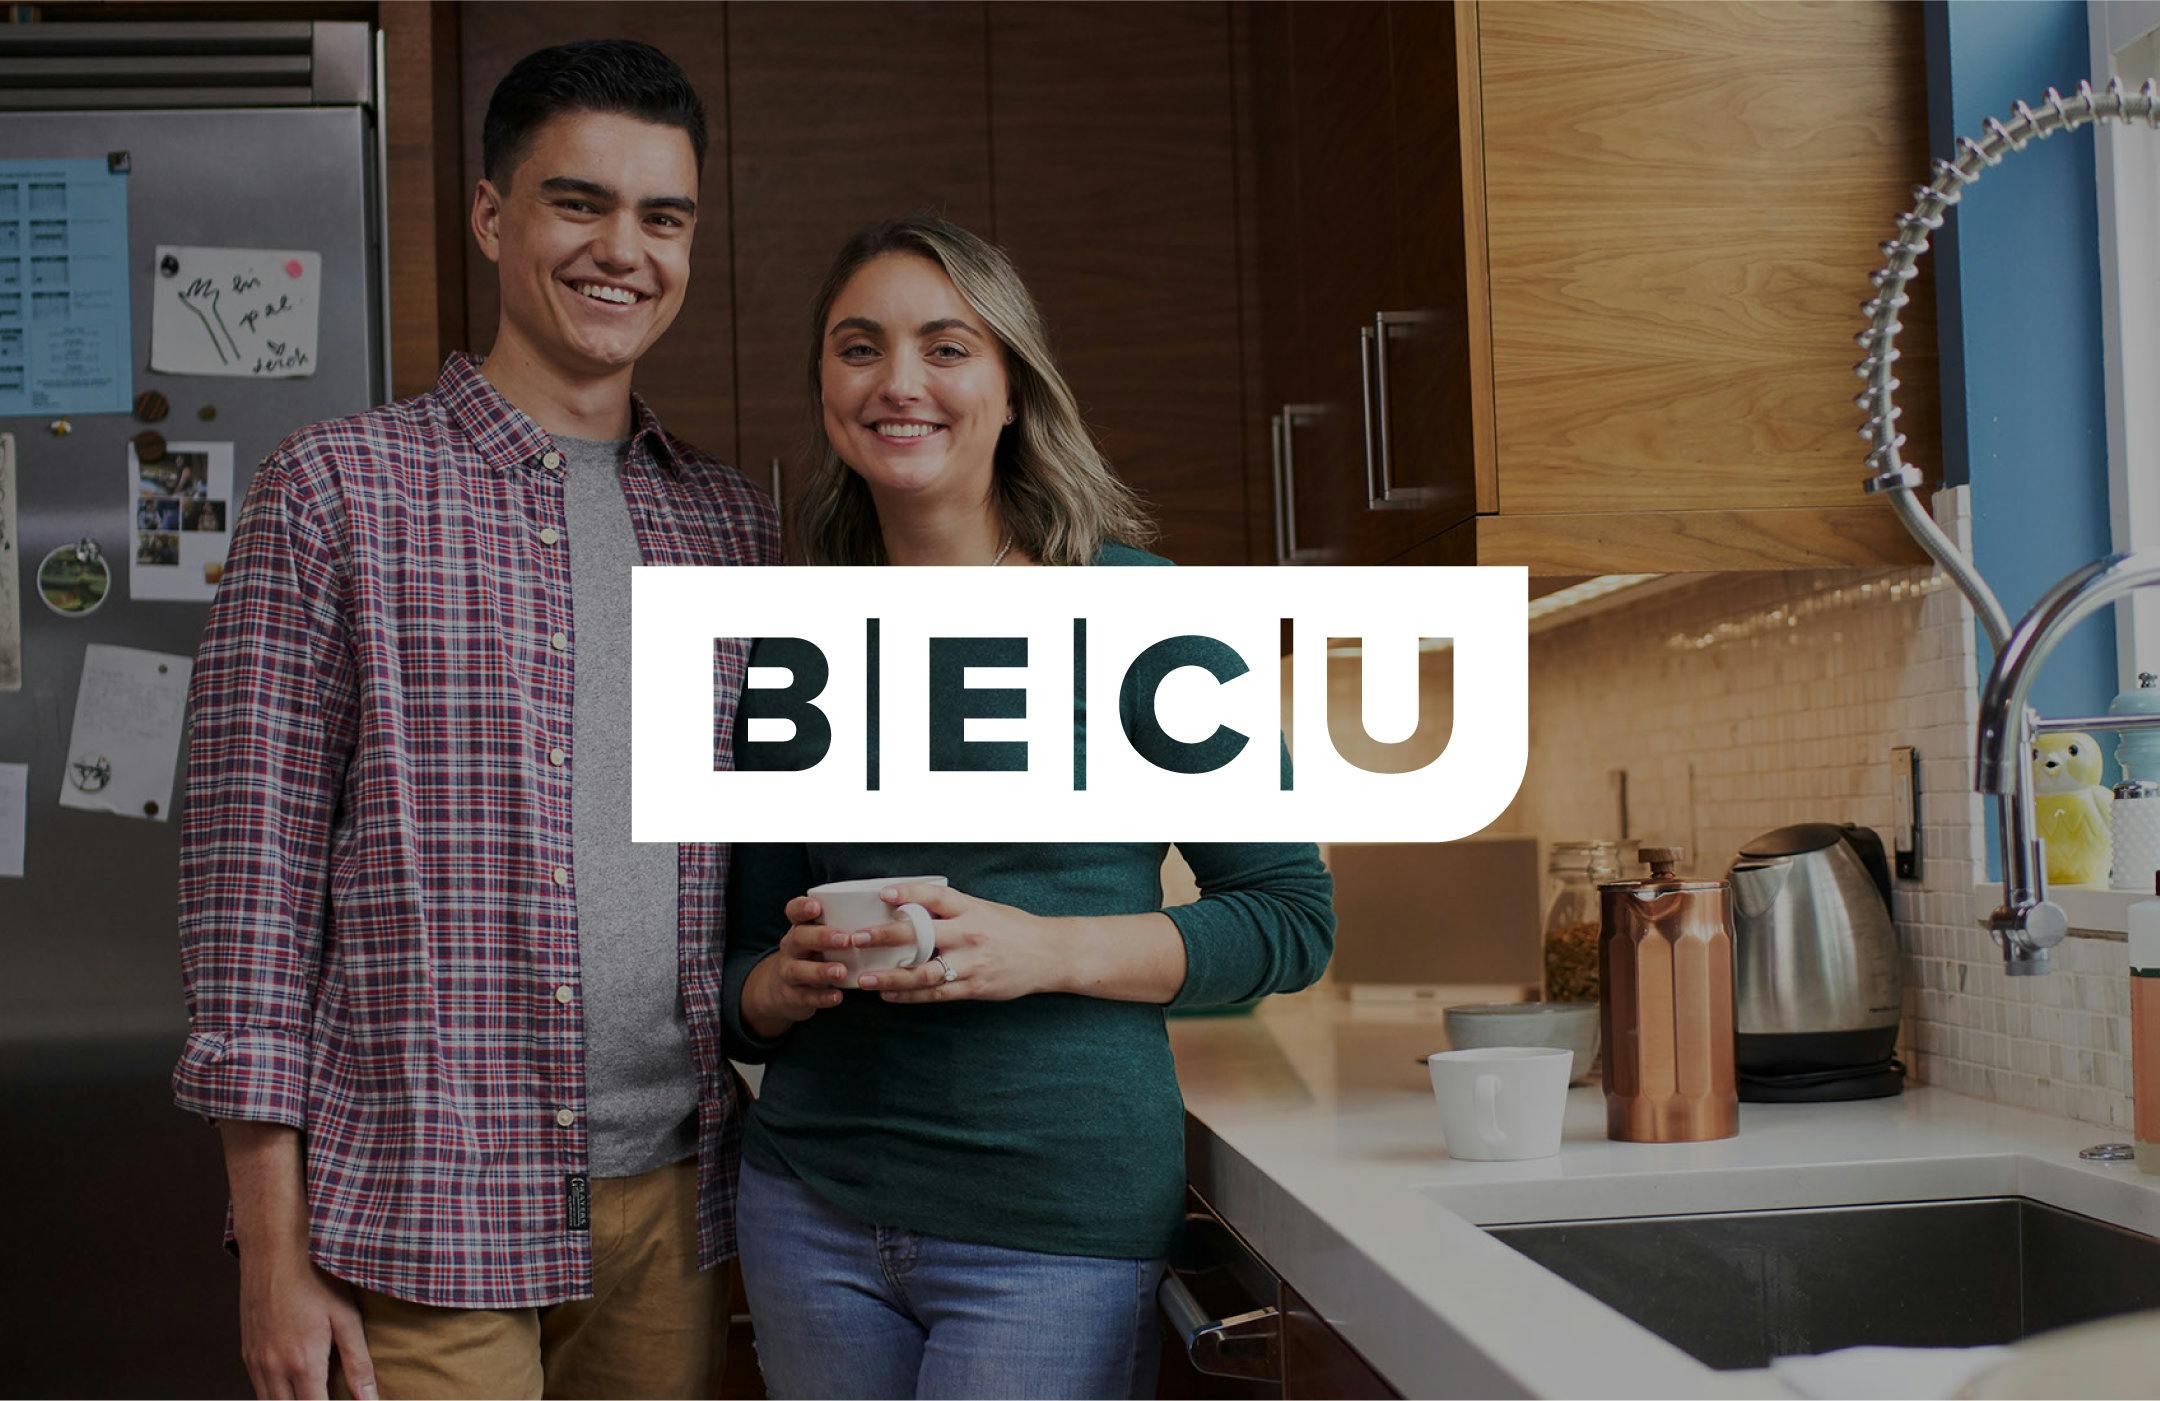 BECU Logo overlaid on a photo of a couple in a modern kitchen